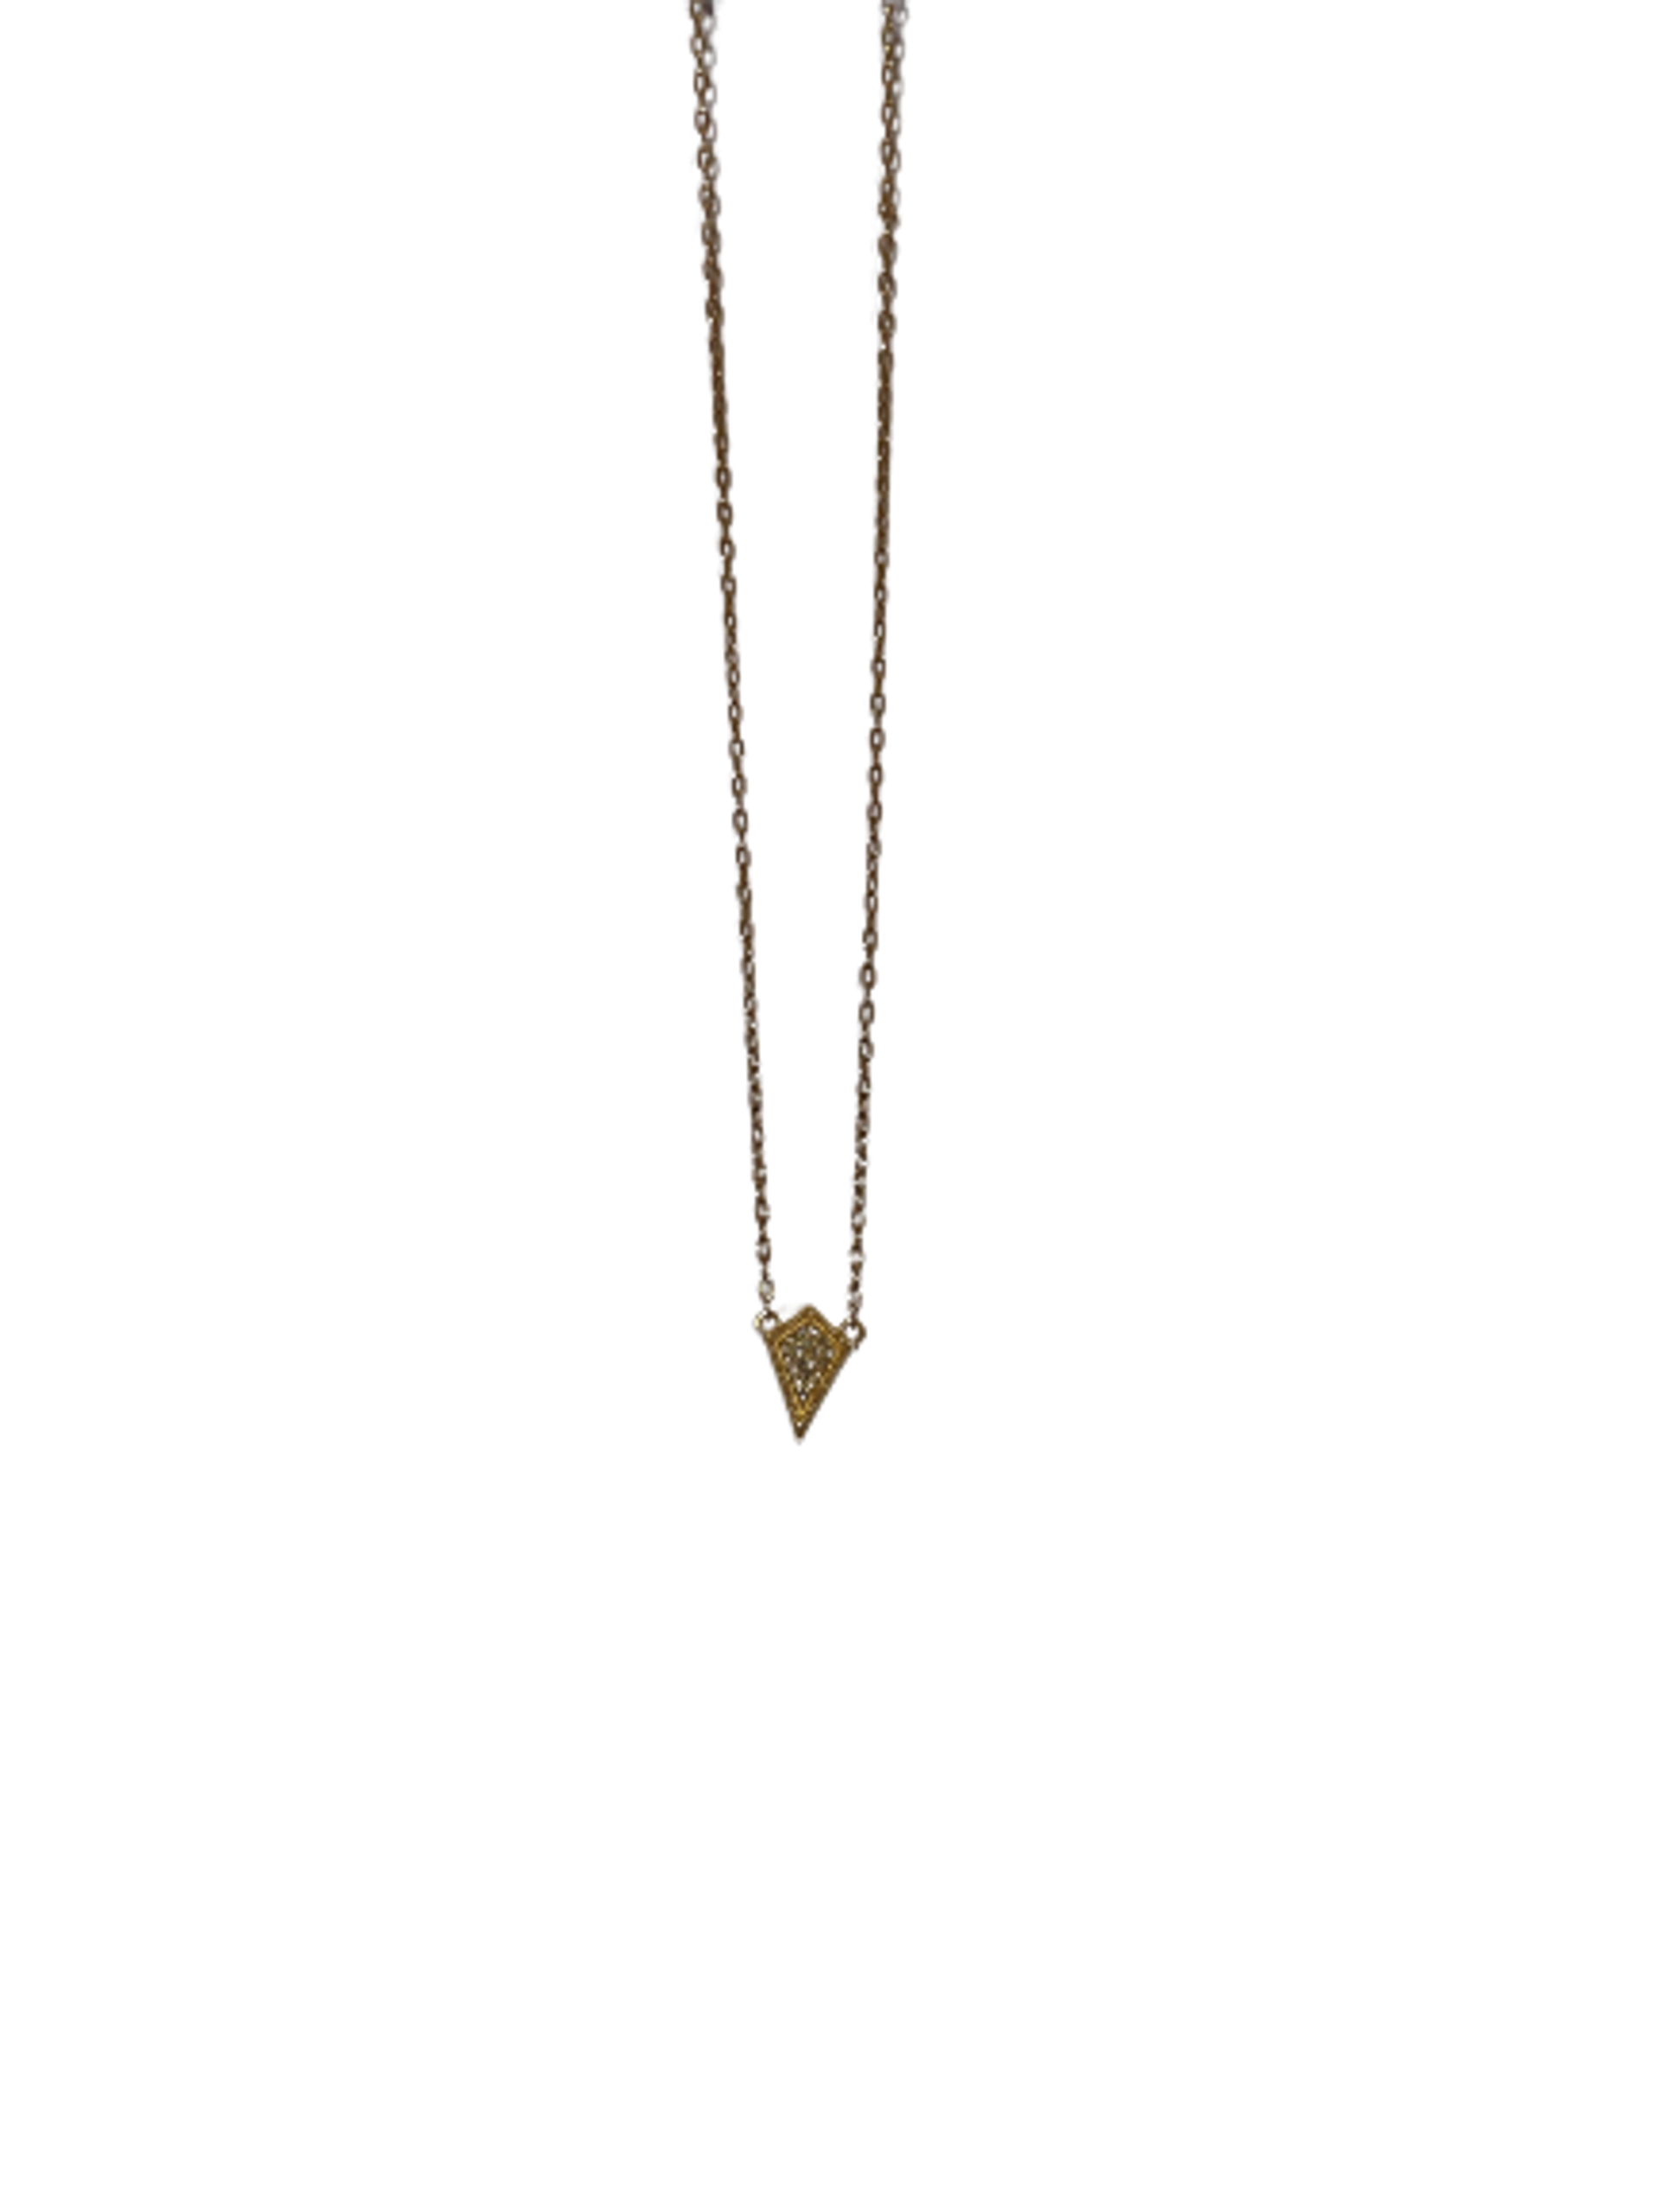 Gold Filled Delicate Necklace with Pave Diamond Pendant Shaped as a Diamond by Karen Birchmier